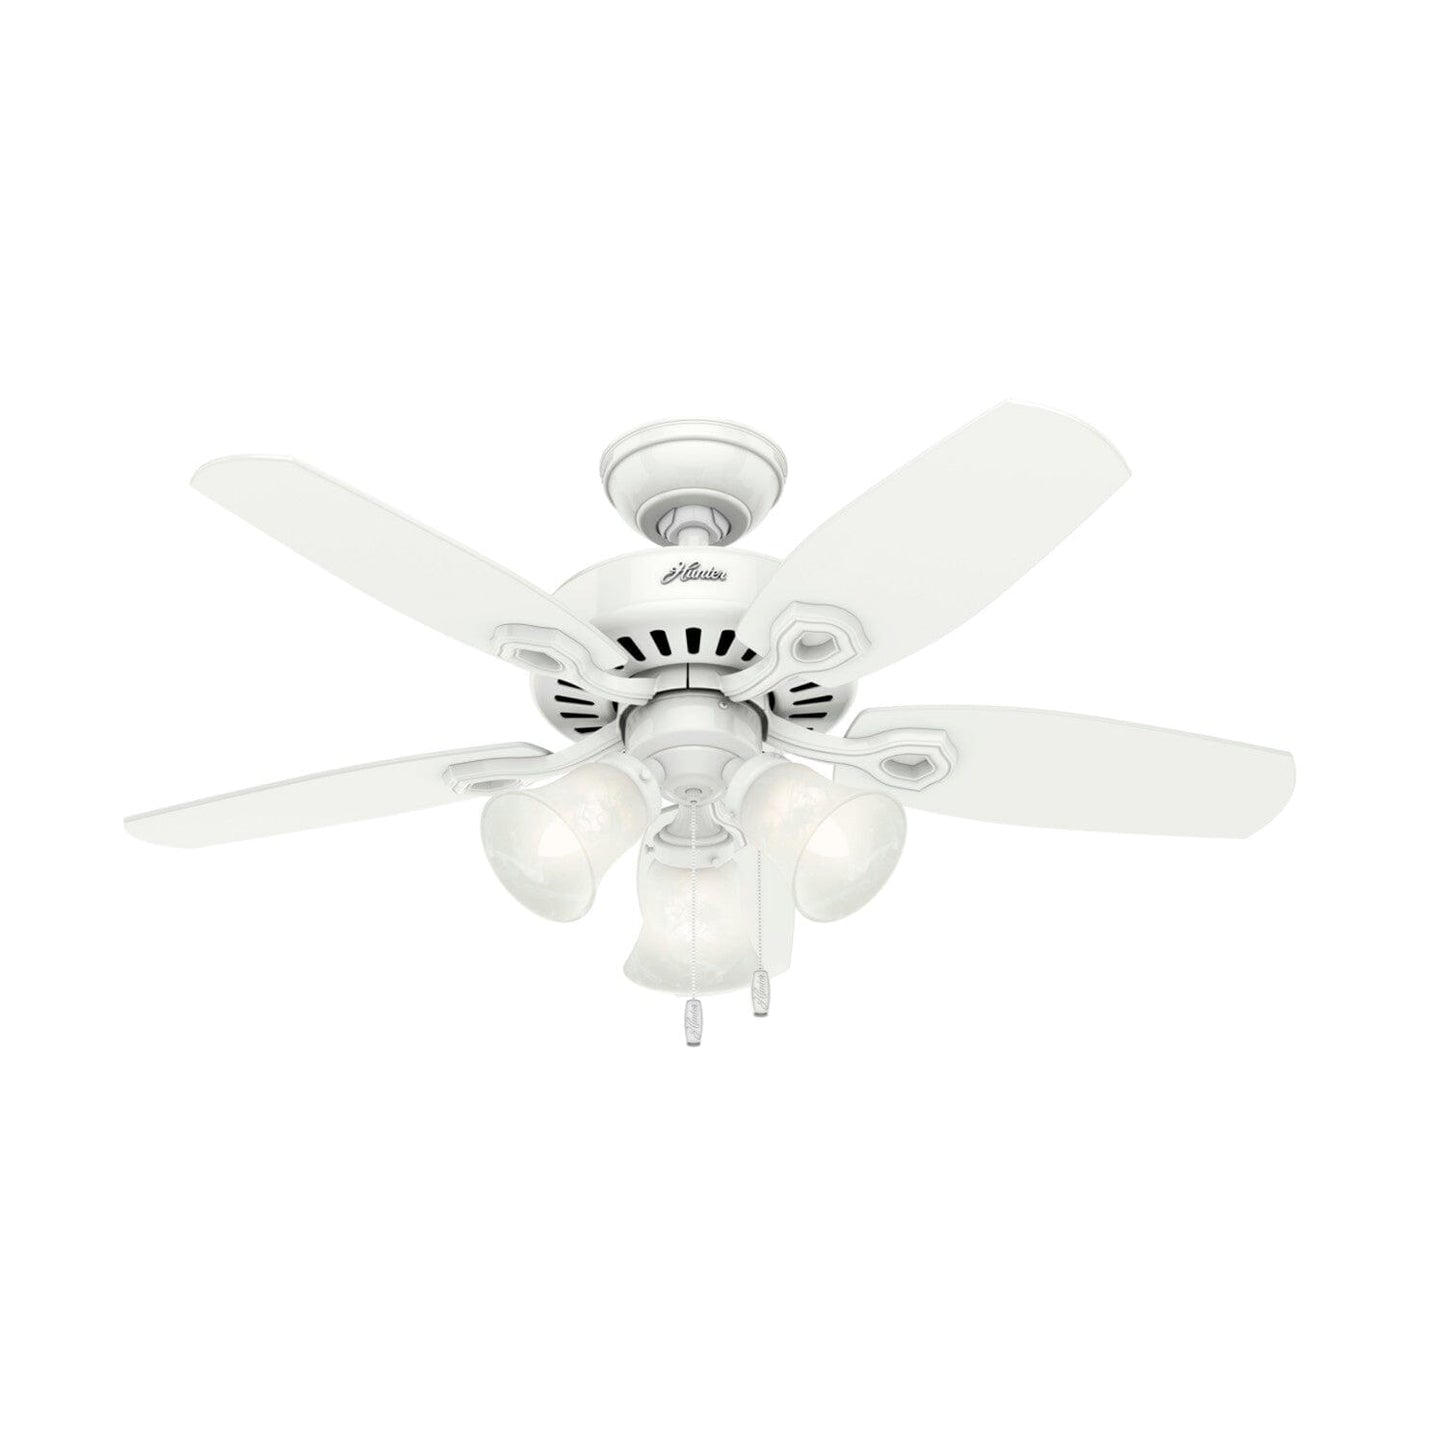 Builder with 3 Lights 42 inch Ceiling Fans Hunter Snow White - Snow White 